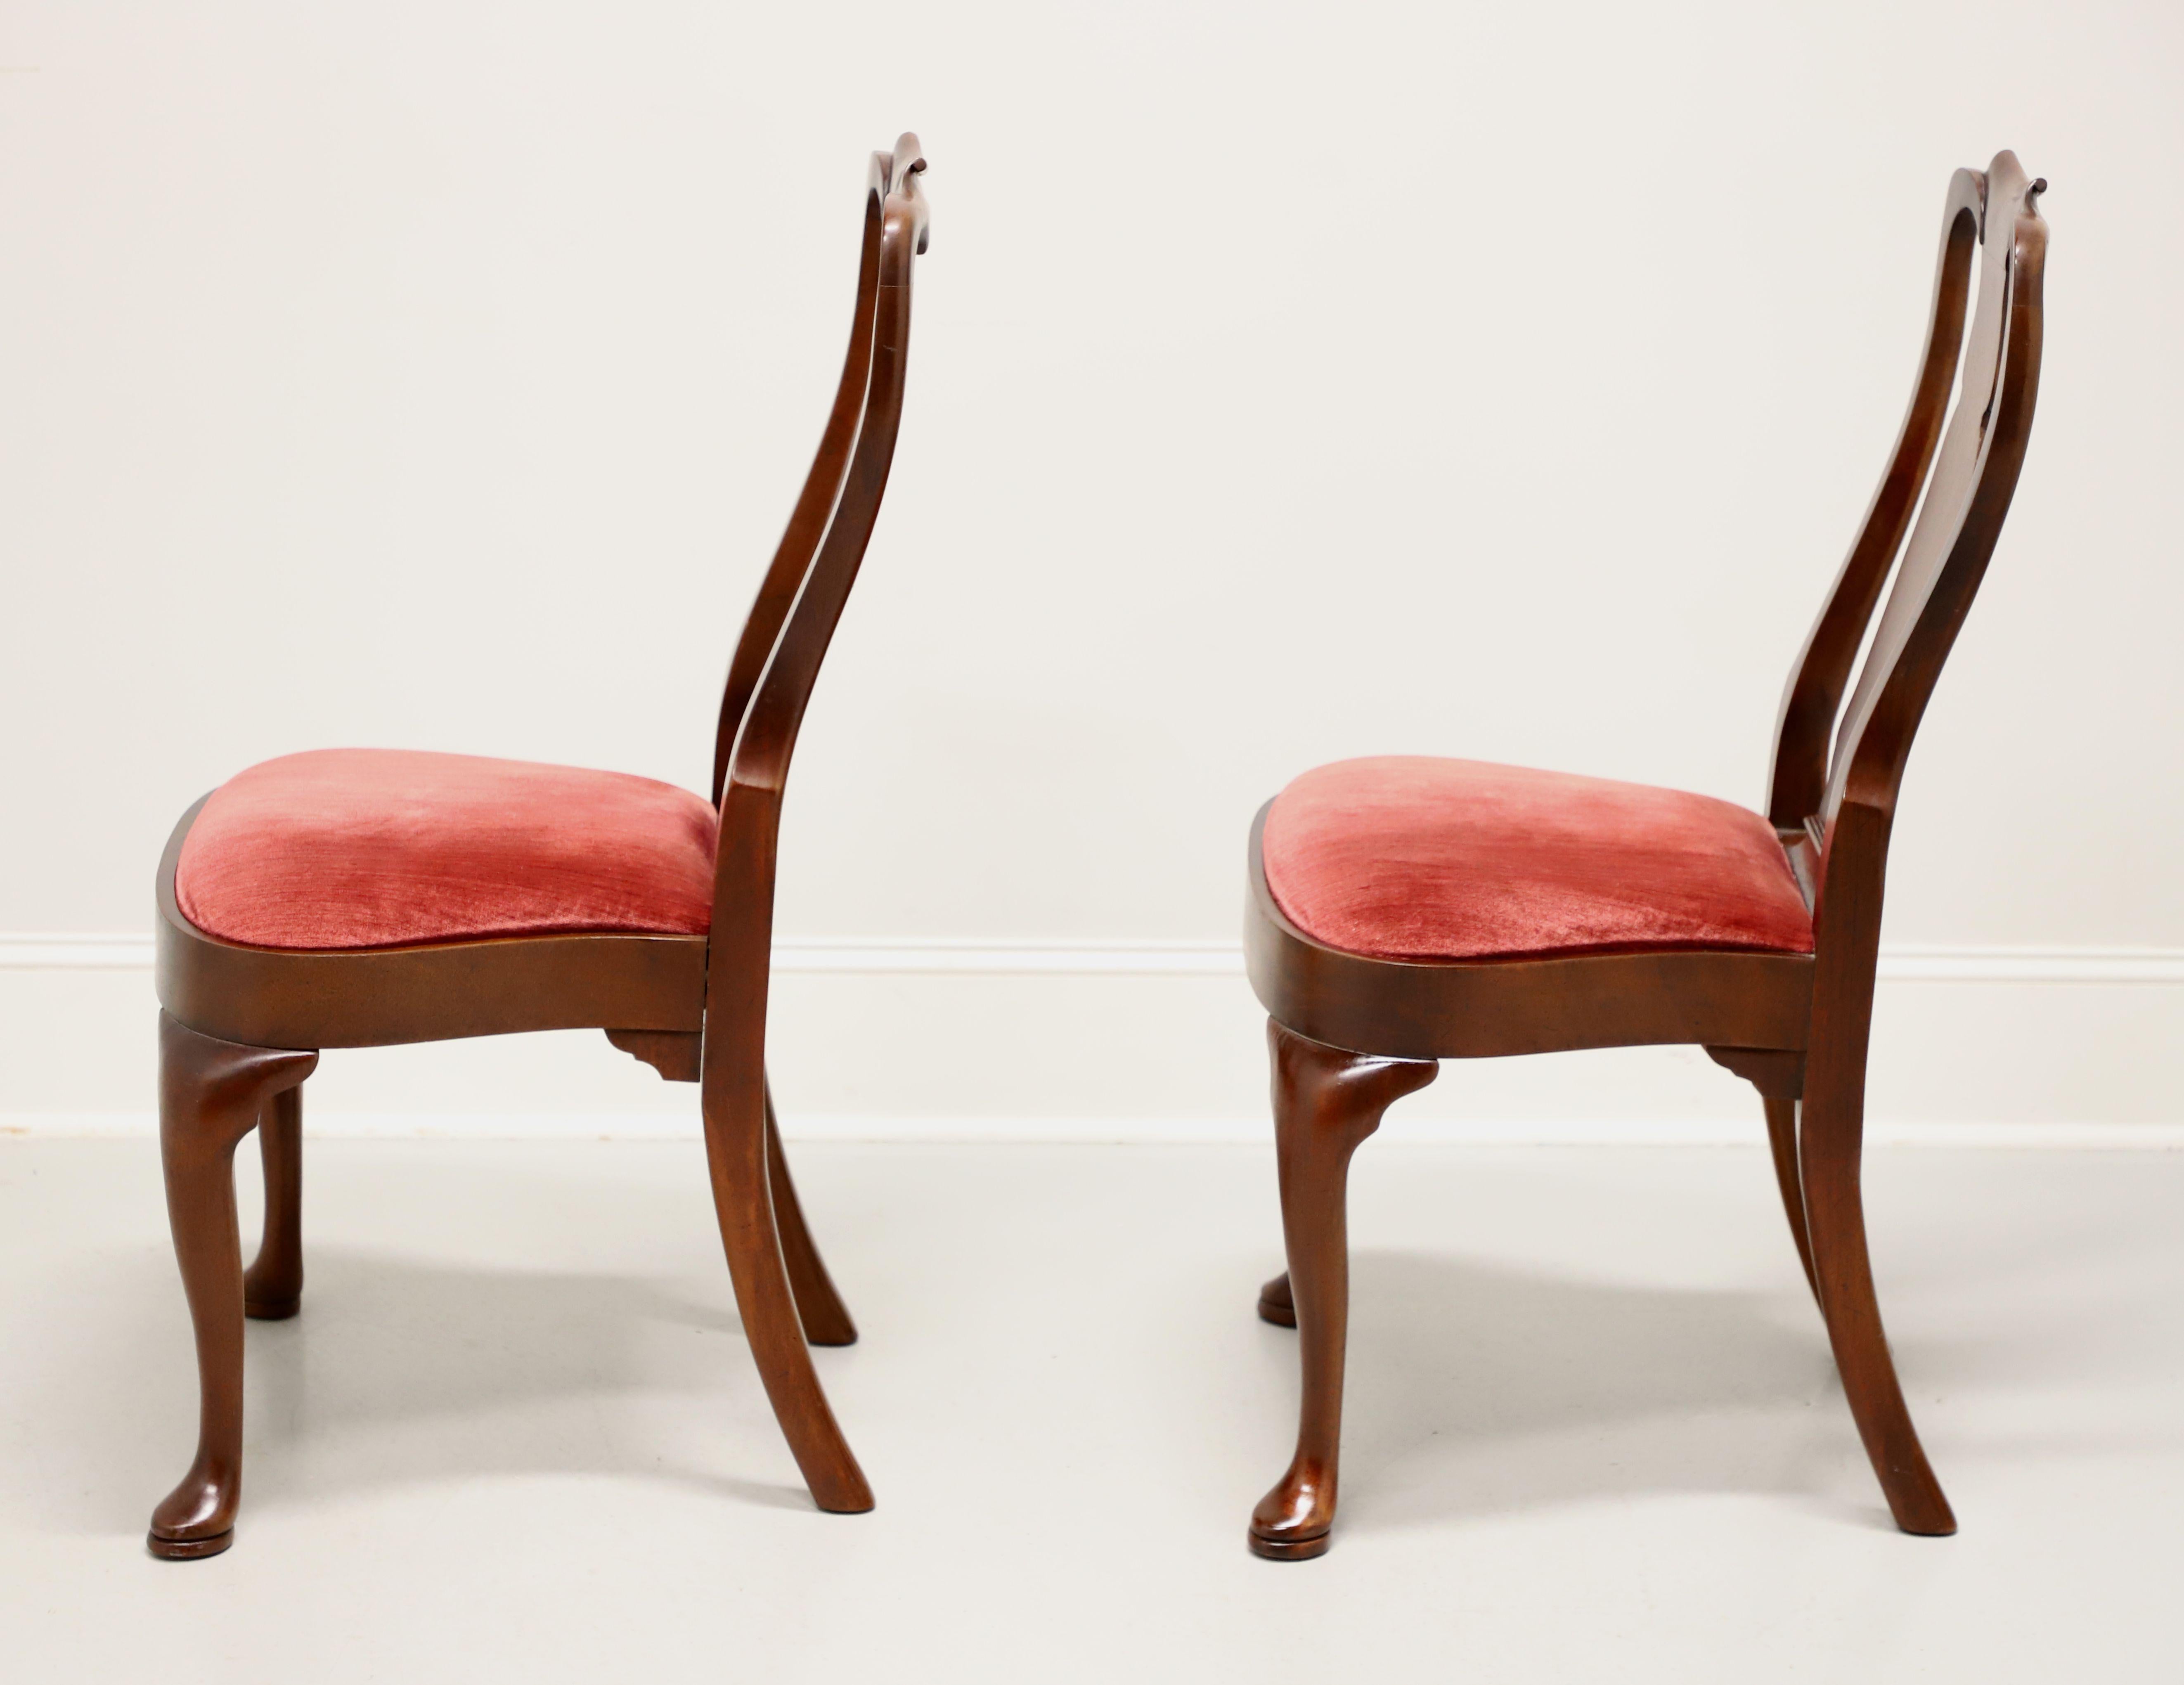 Fabric HICKORY CHAIR Mahogany Queen Anne Dining Side Chairs - Pair C For Sale